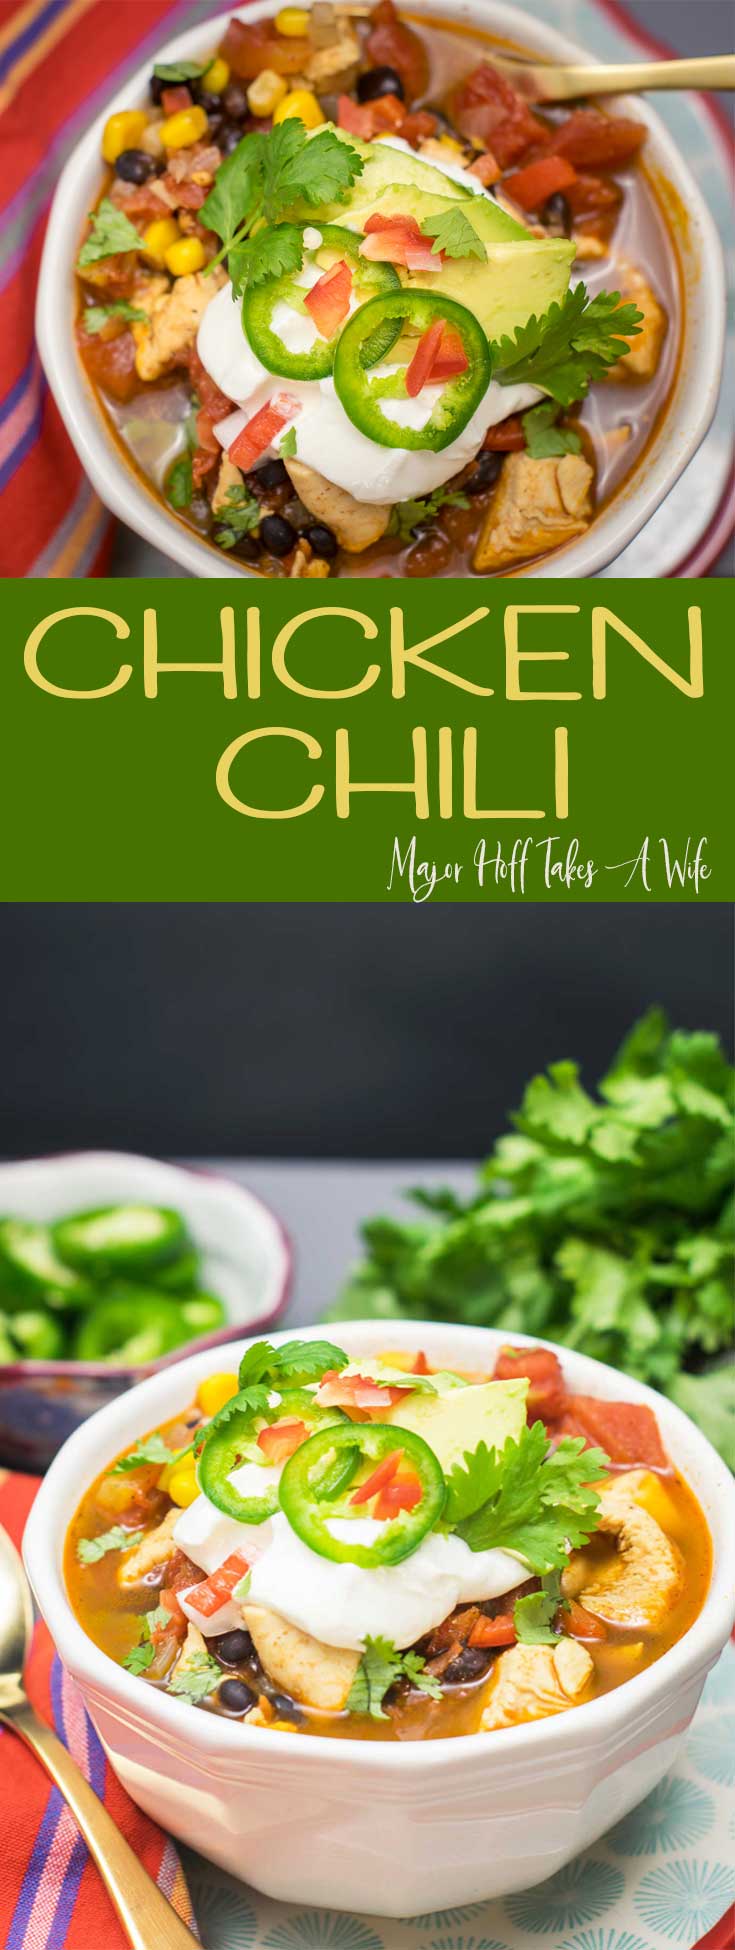 You will adore this chipotle chicken chili! A perfect recipe to warm you up! This chicken chili recipe features chipotle, black beans, corn and spices. #chili #ChickenChili #comfortfood #soup #chickenrecipes via @MrsMajorHoff via @mrsmajorhoff